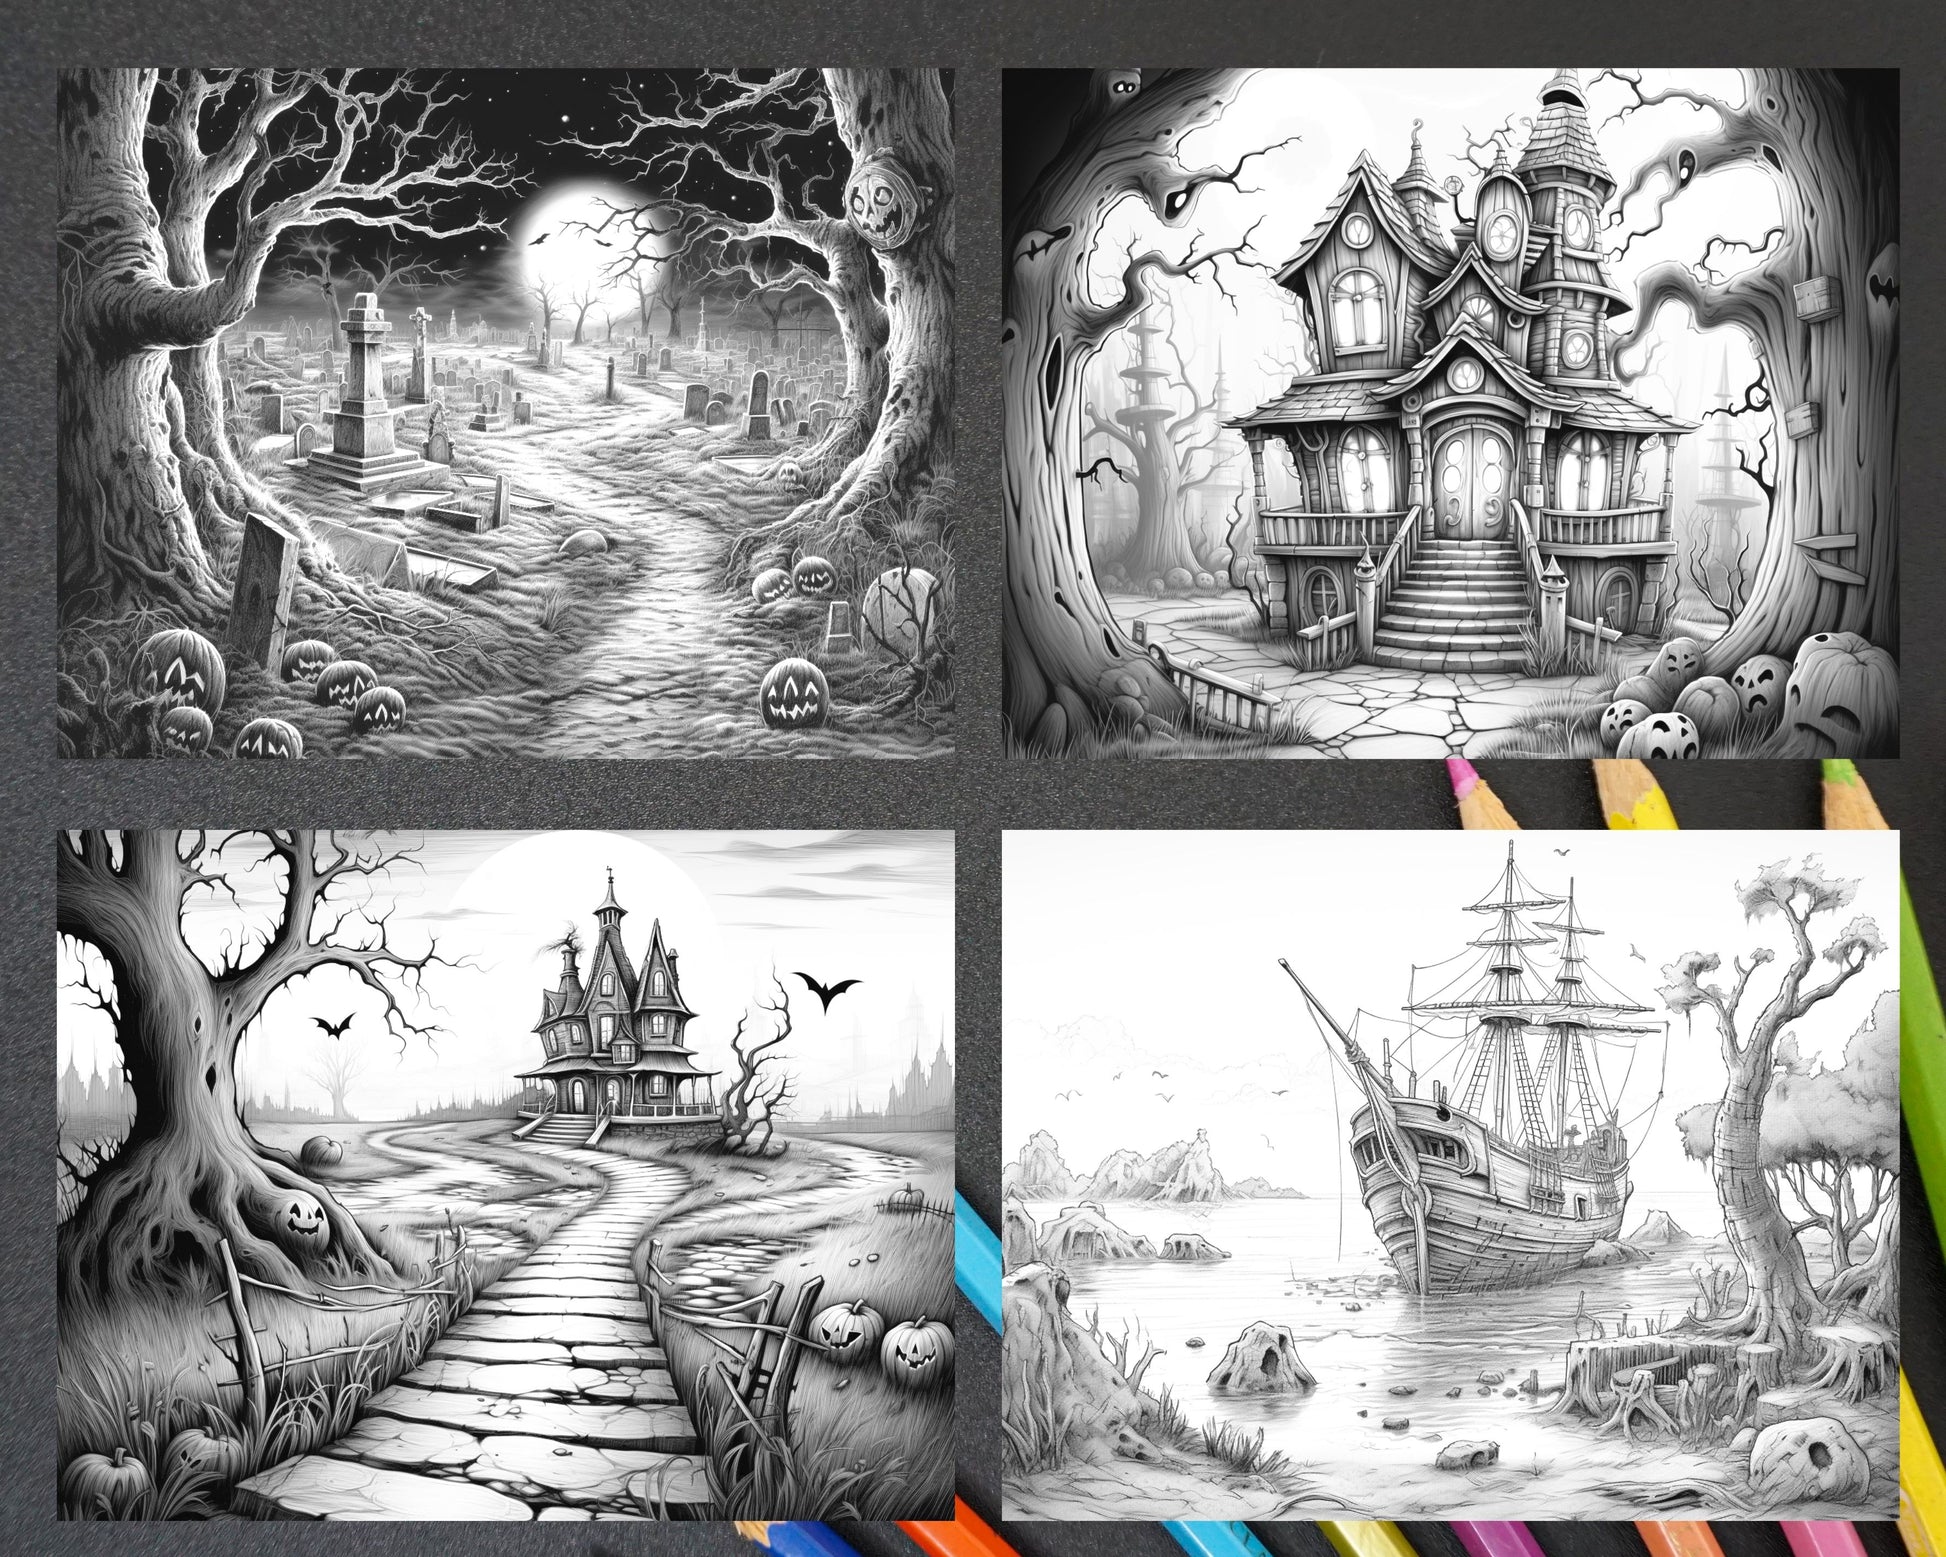 Halloween Landscape Coloring Page, Grayscale Witchcraft Coloring Printable, Spooky Autumn Scene Coloring Sheet, Dark Fantasy Printable Coloring, Haunted Forest Coloring Page, Creepy October Landscape Printable, Witch and Wizard Adult Coloring, Seasonal Grayscale Coloring Page